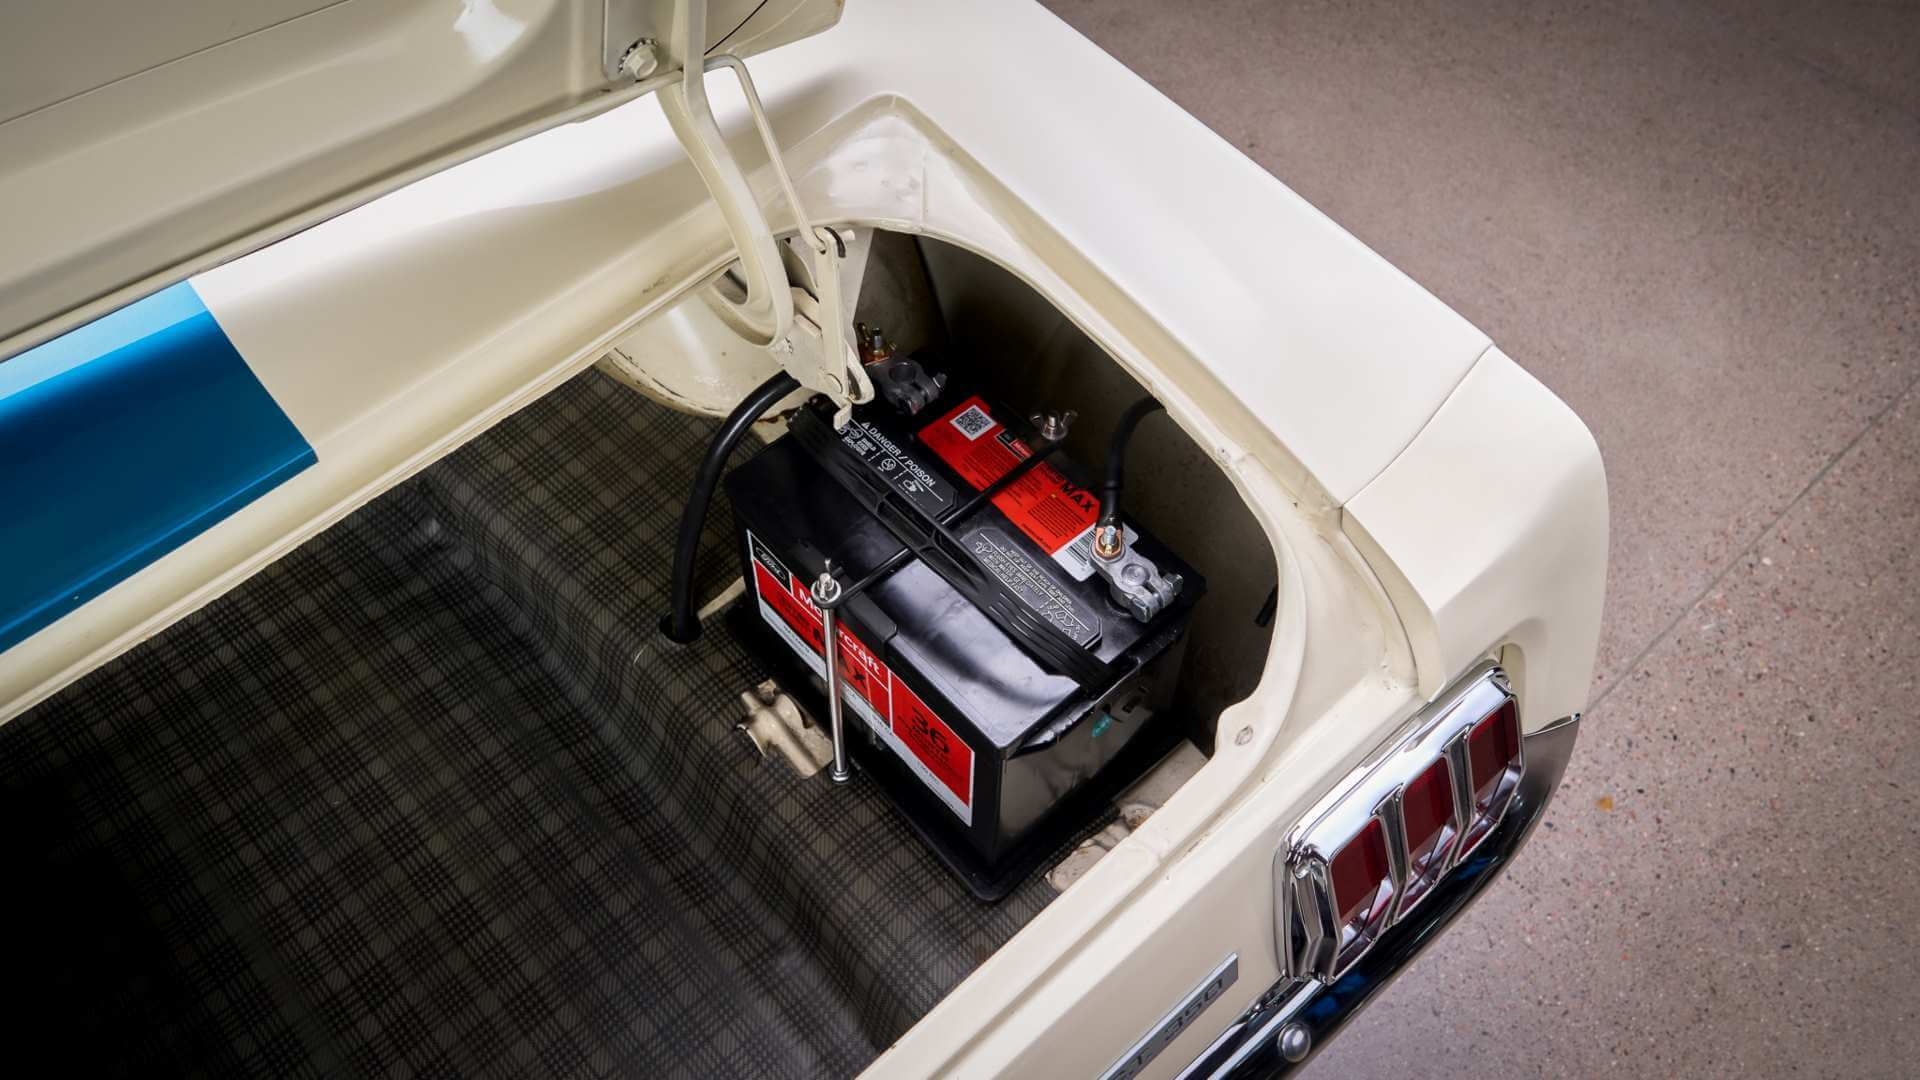 Motorcraft battery sitting in the trunk of a blue and white vintage car